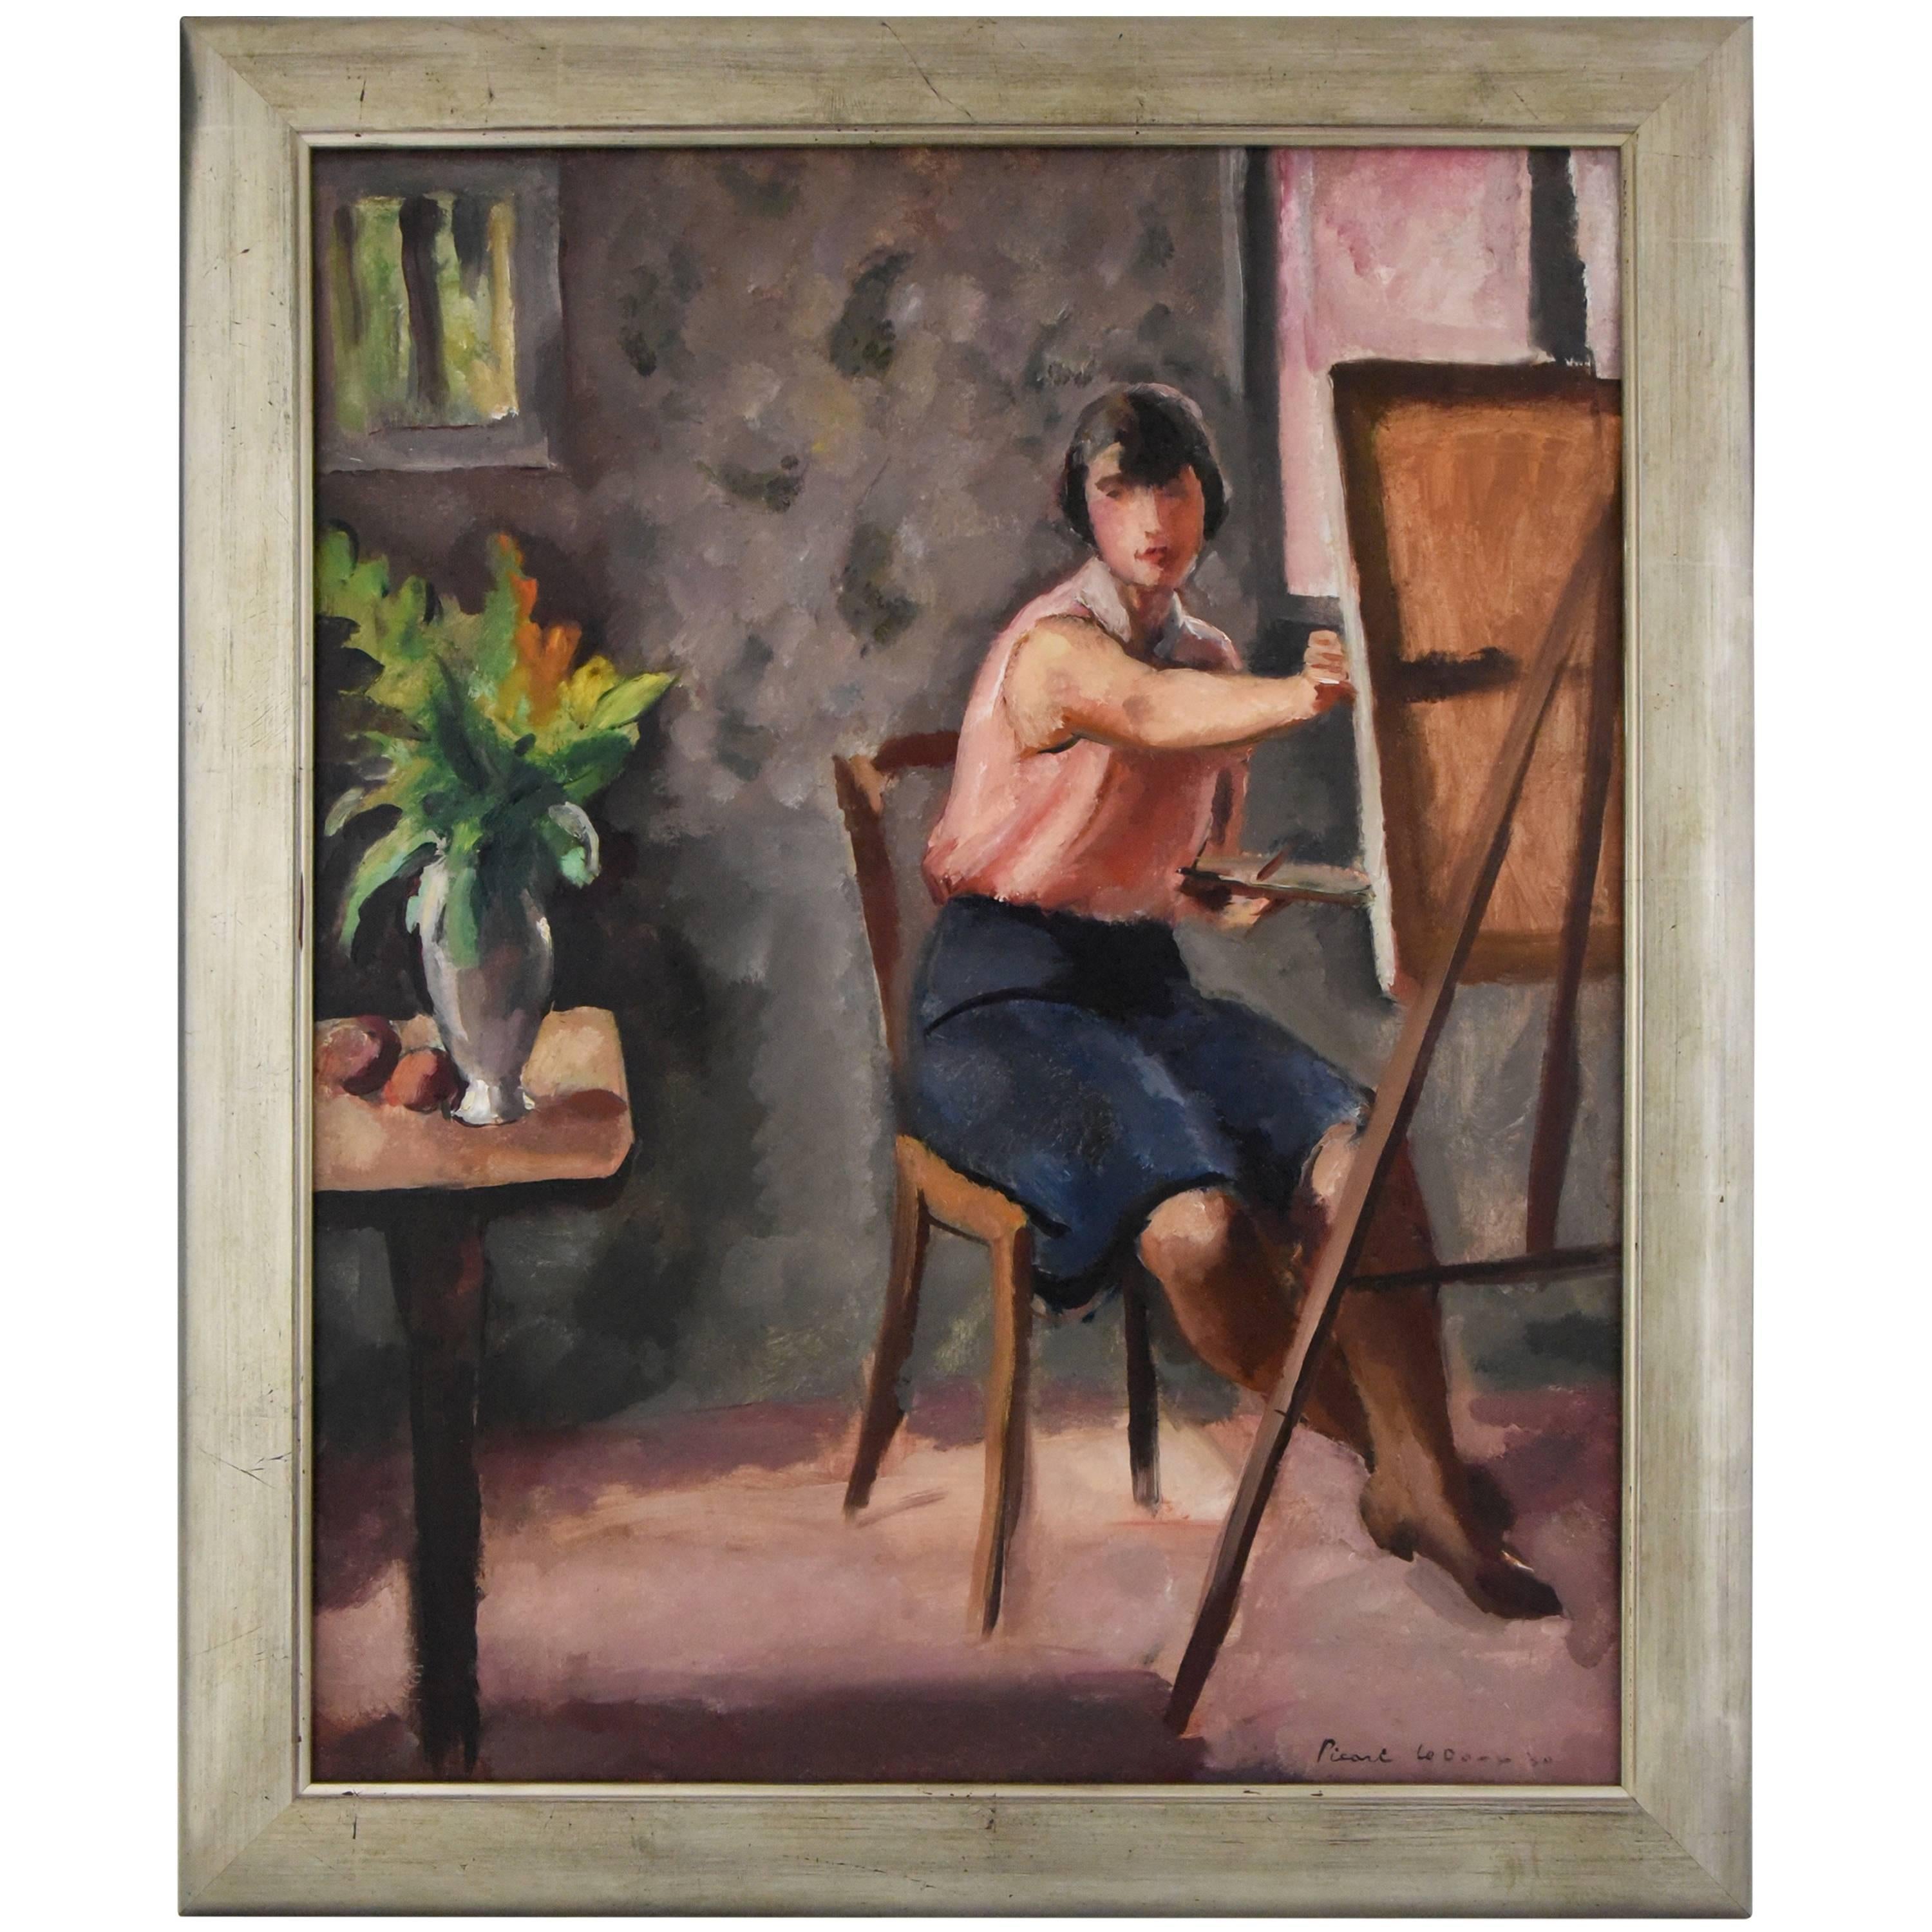 Art Deco Painting Woman Painter in an Interior by Picard Le Doux  1930 France